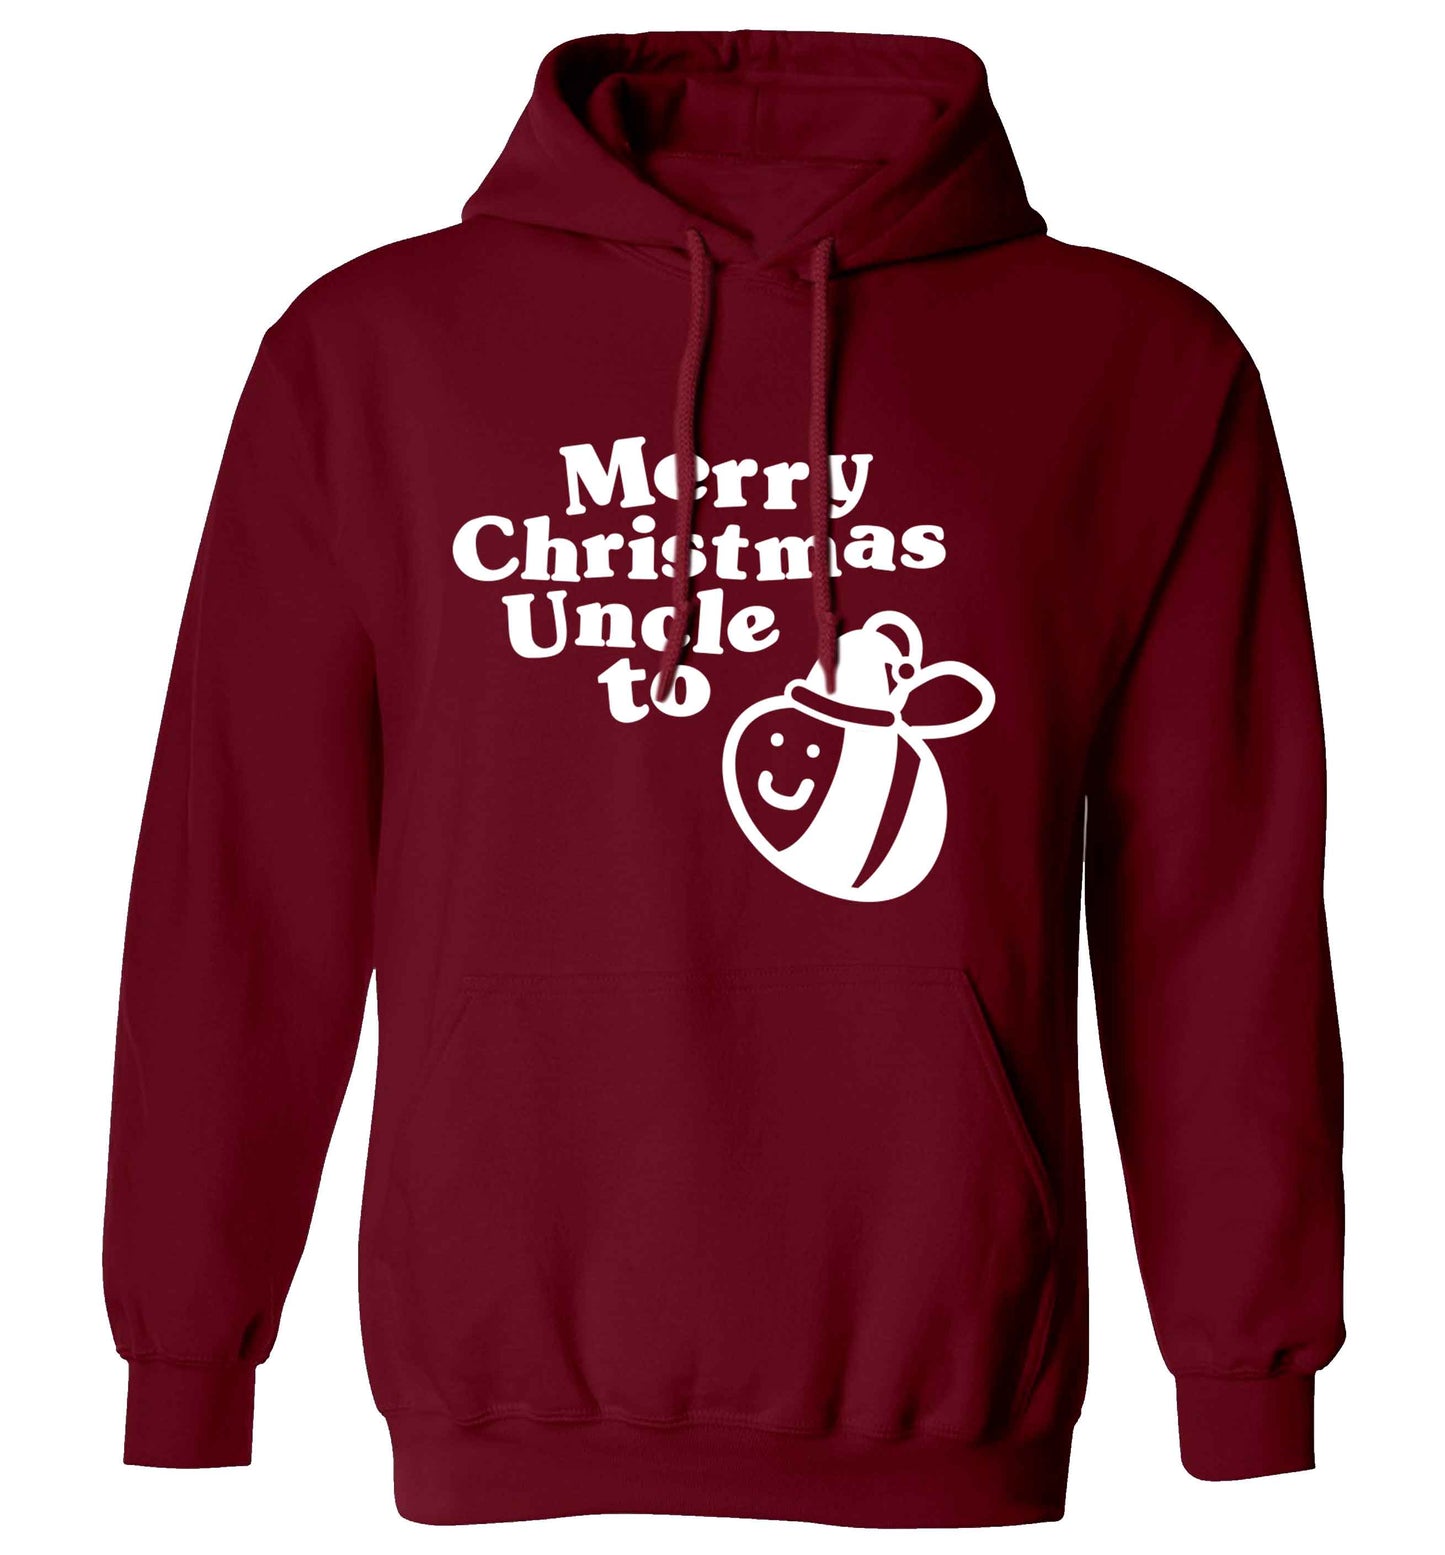 Merry Christmas uncle to be adults unisex maroon hoodie 2XL